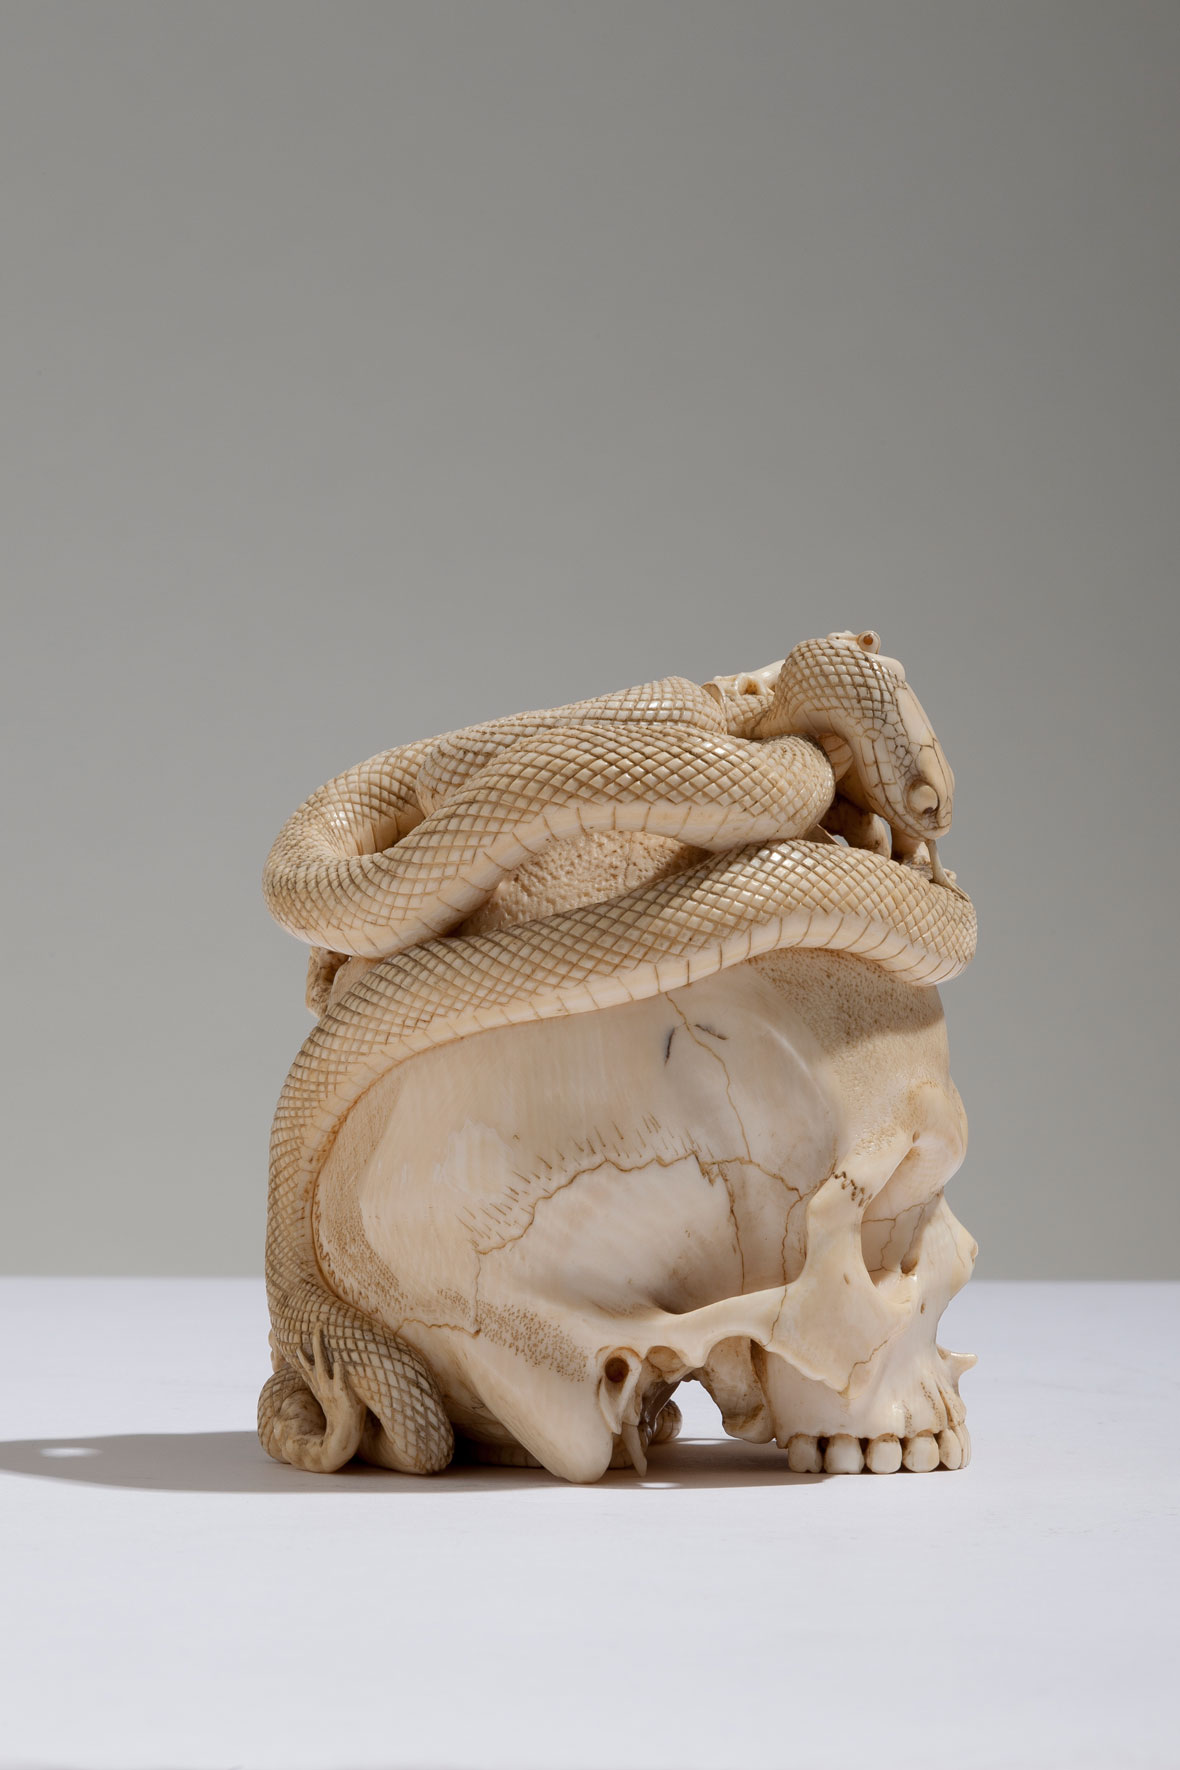 Japanese Ivory Skull with Coiled Snake and Toads